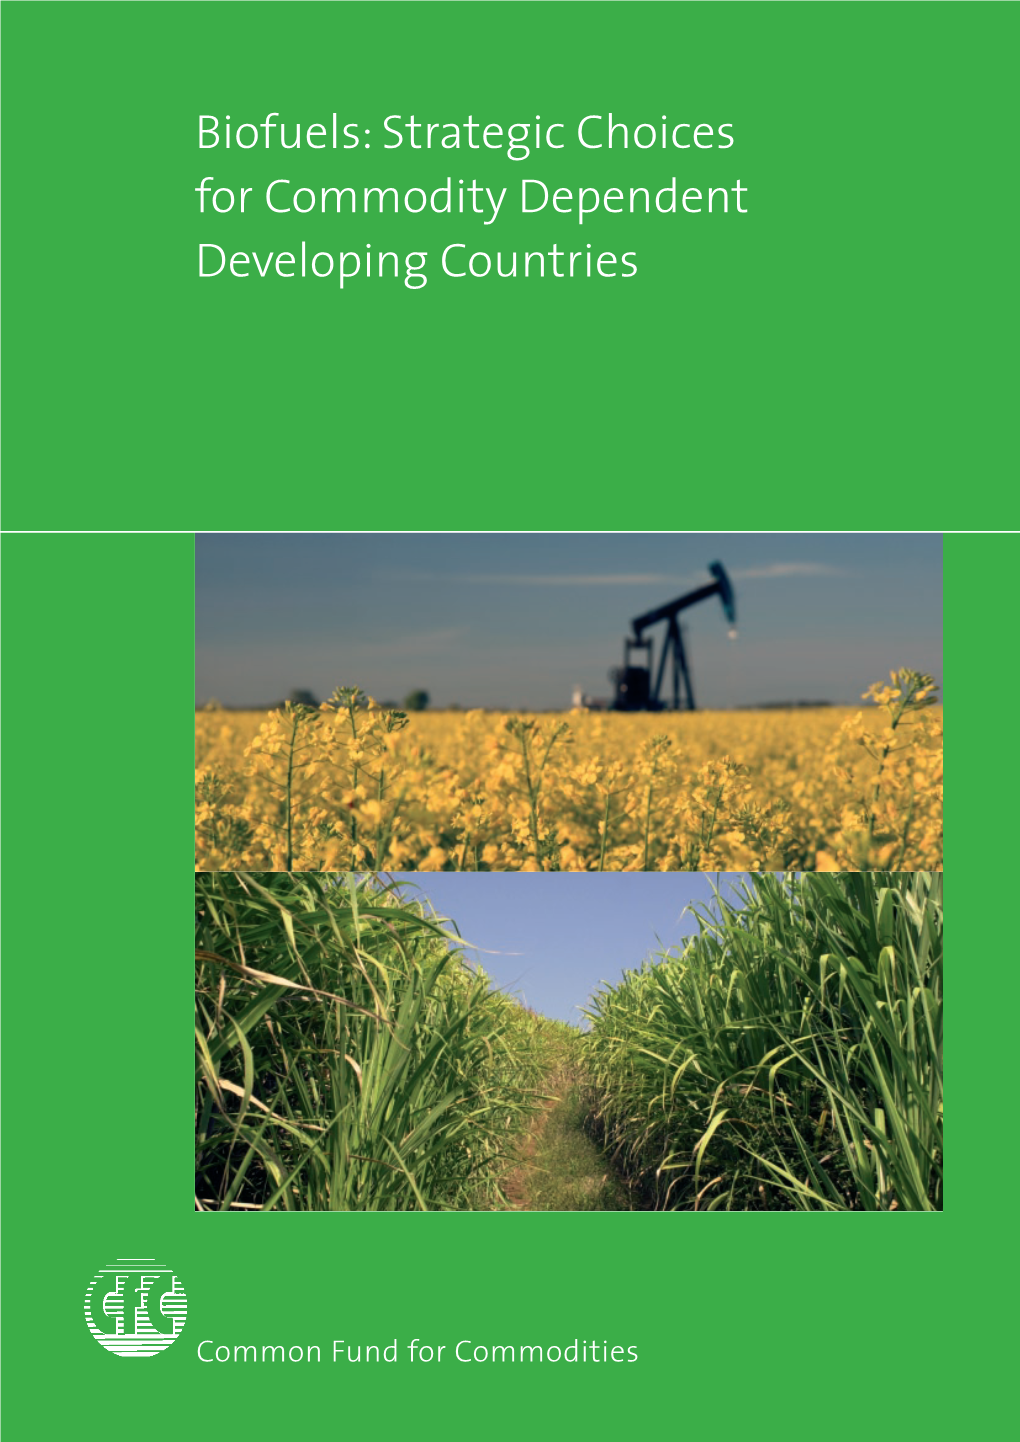 Biofuels: Strategic Choices for Commodity Dependent Developing Countries